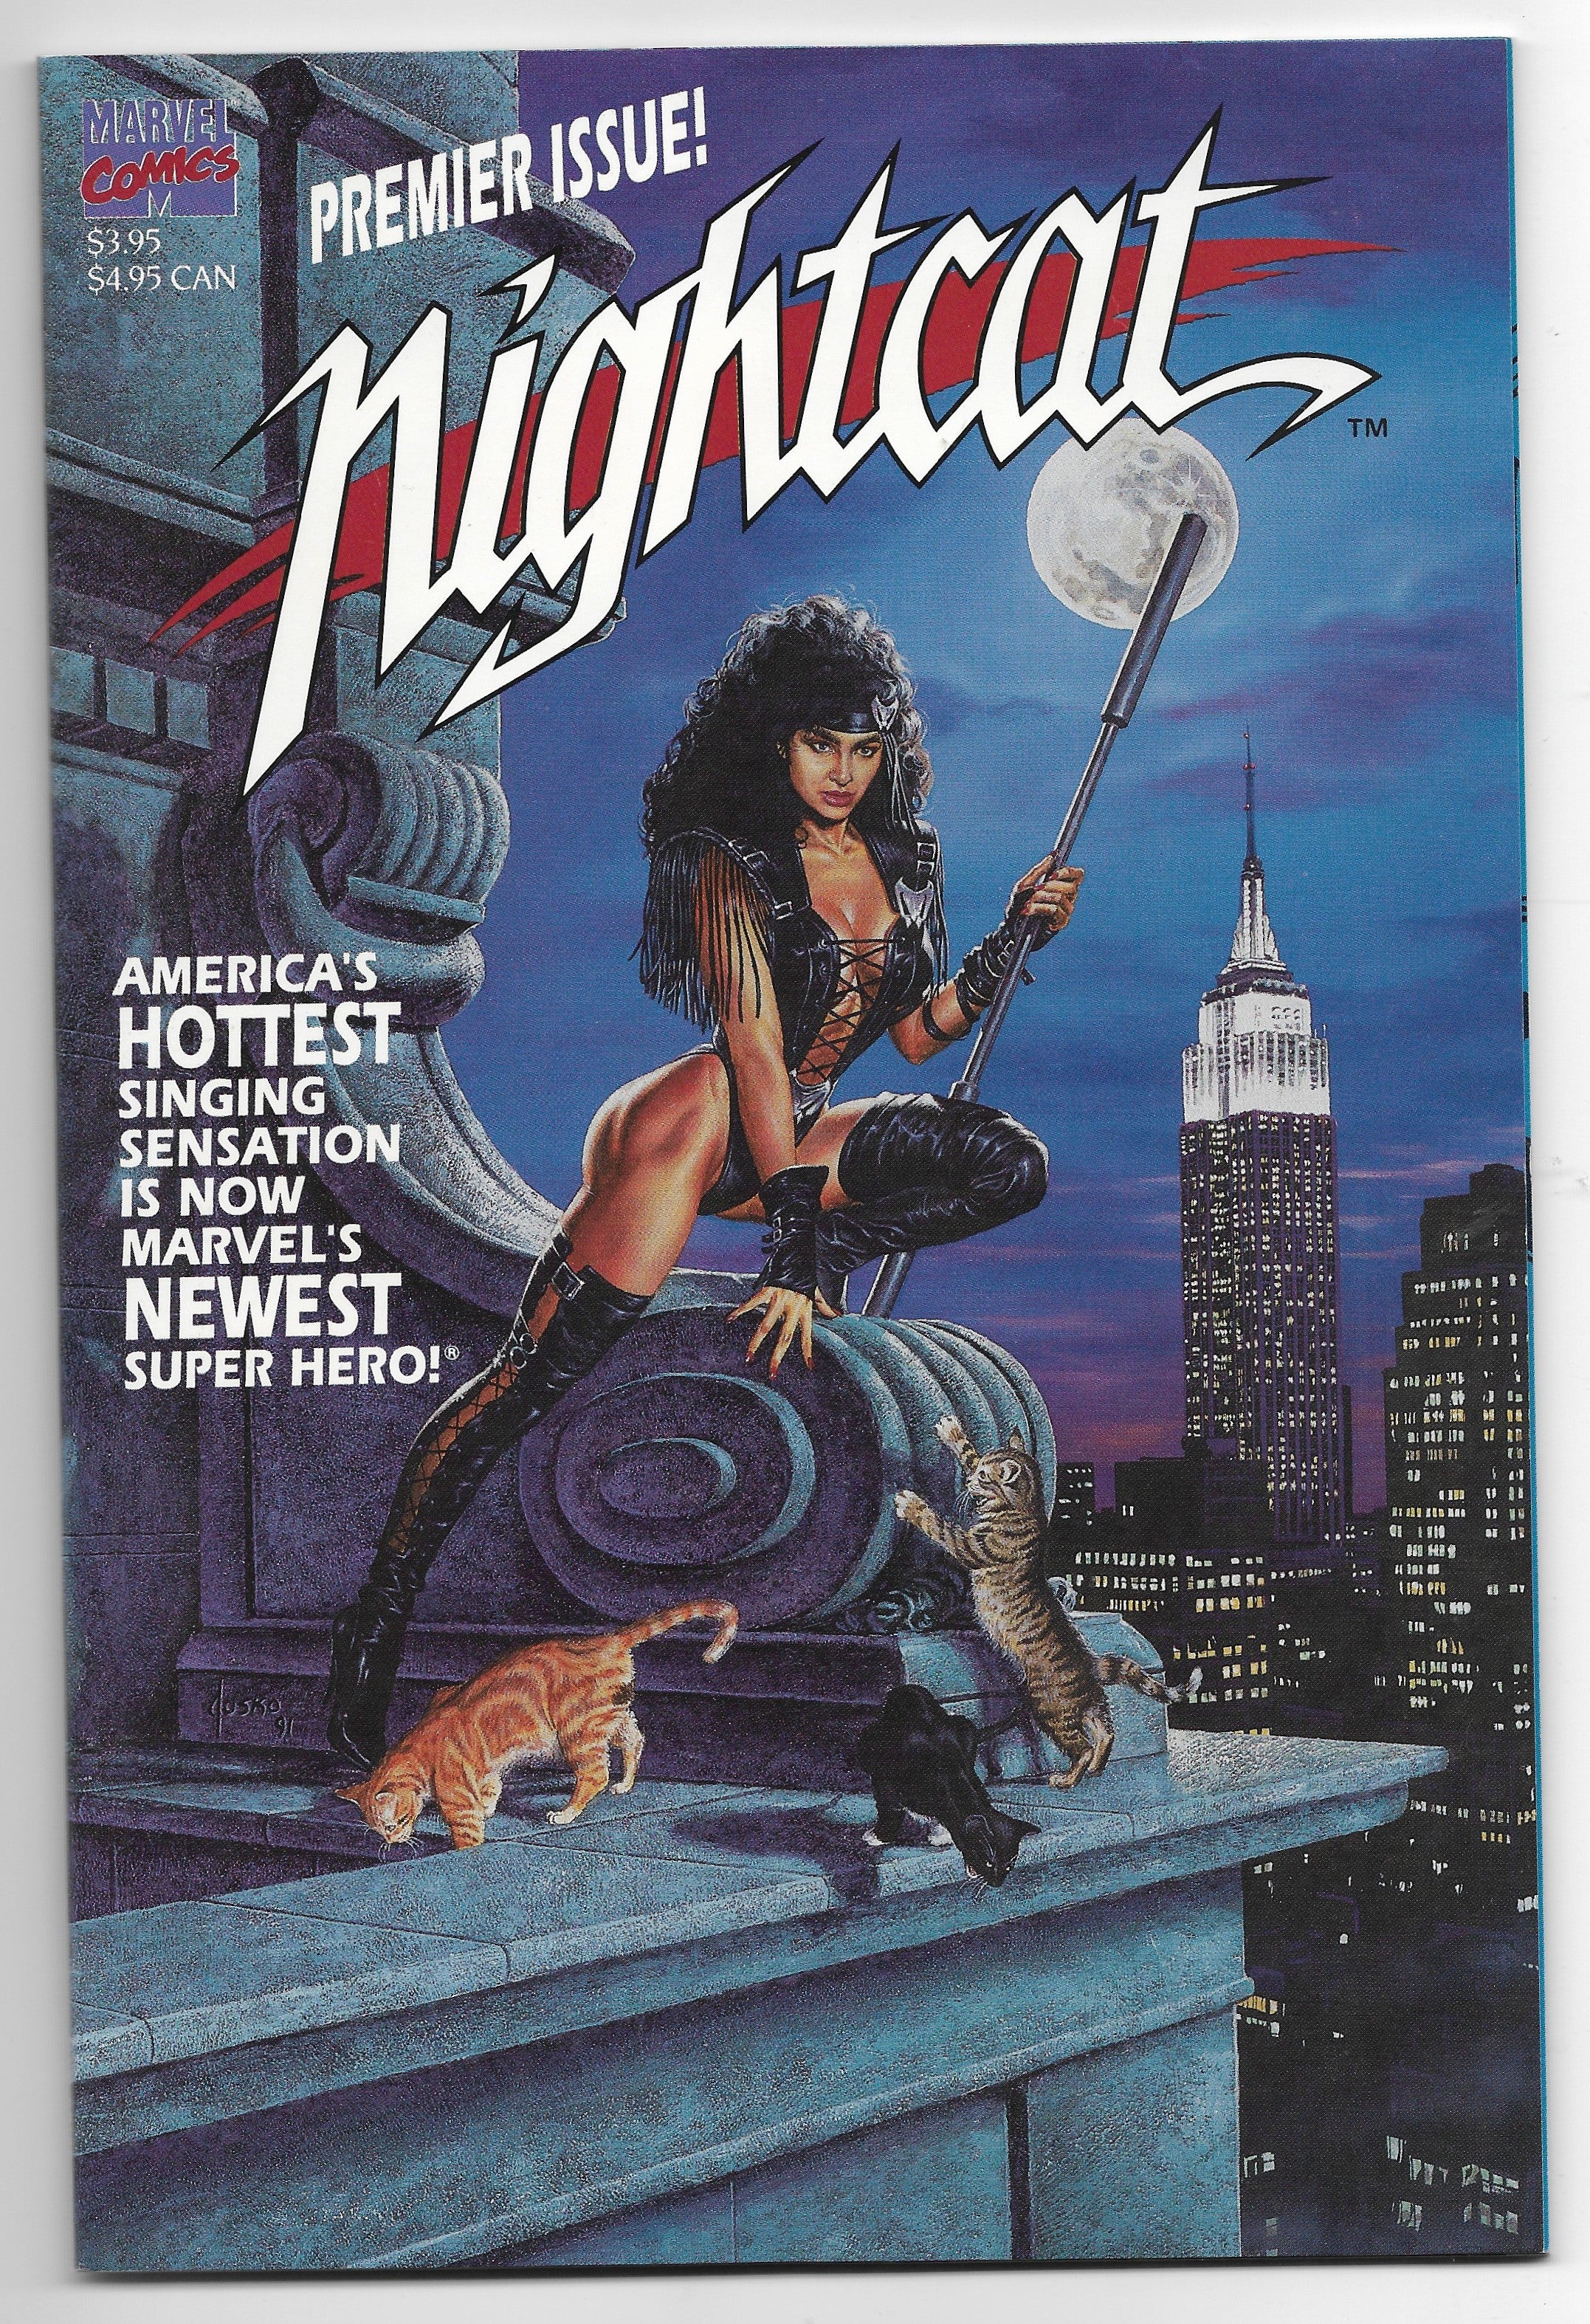 Photo of VF Nightcat (91) 1 Denys Cowan, Jimmy Palmiotti Comic sold by Stronghold Collectibles